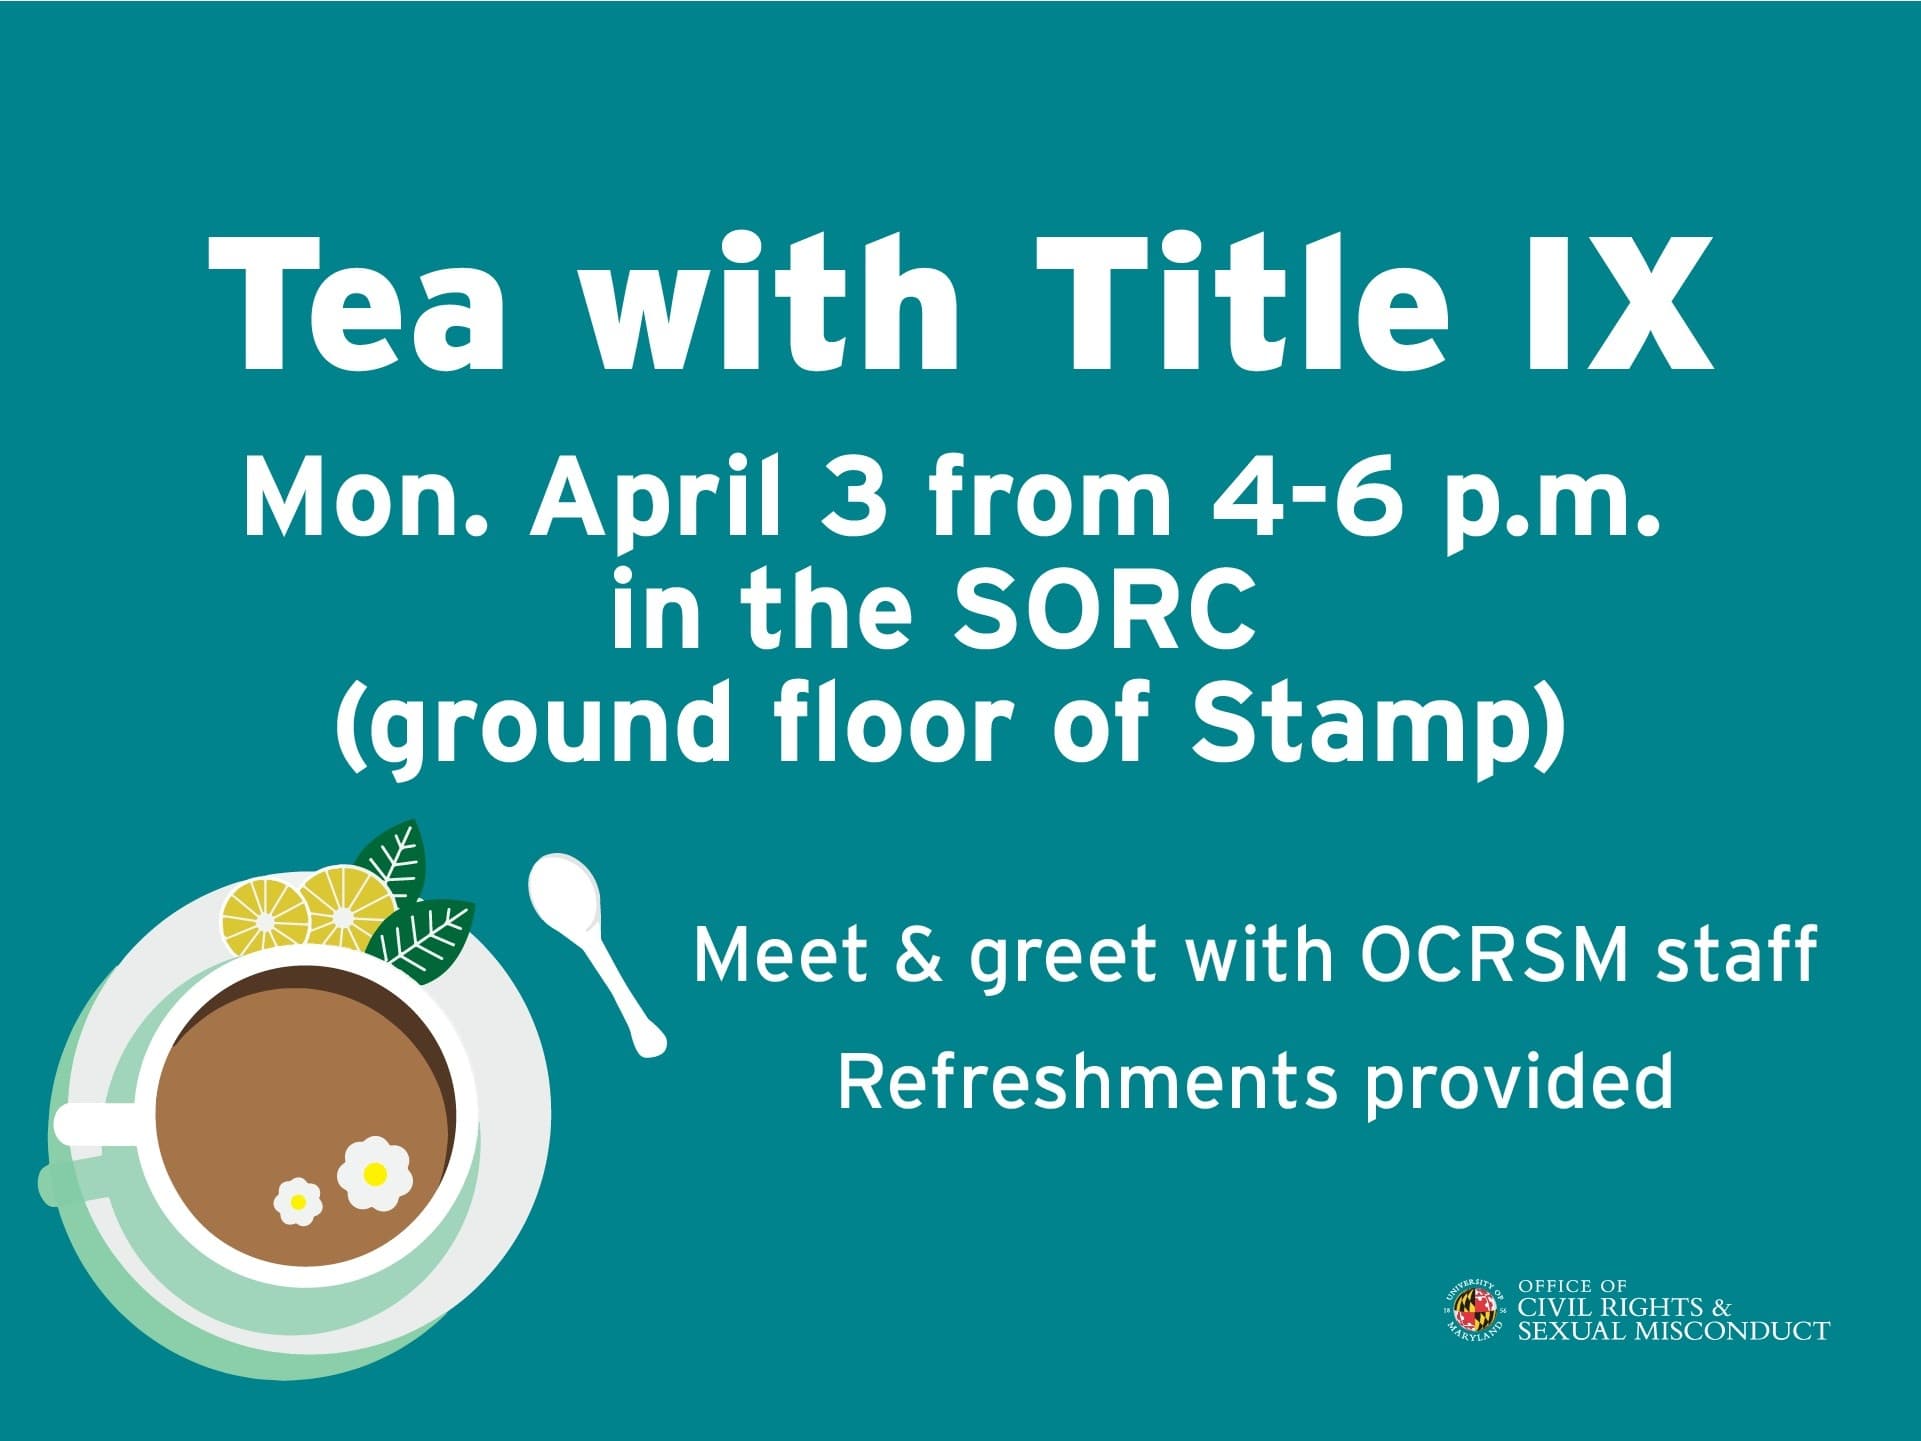 Tea with Title IX Event Flyer